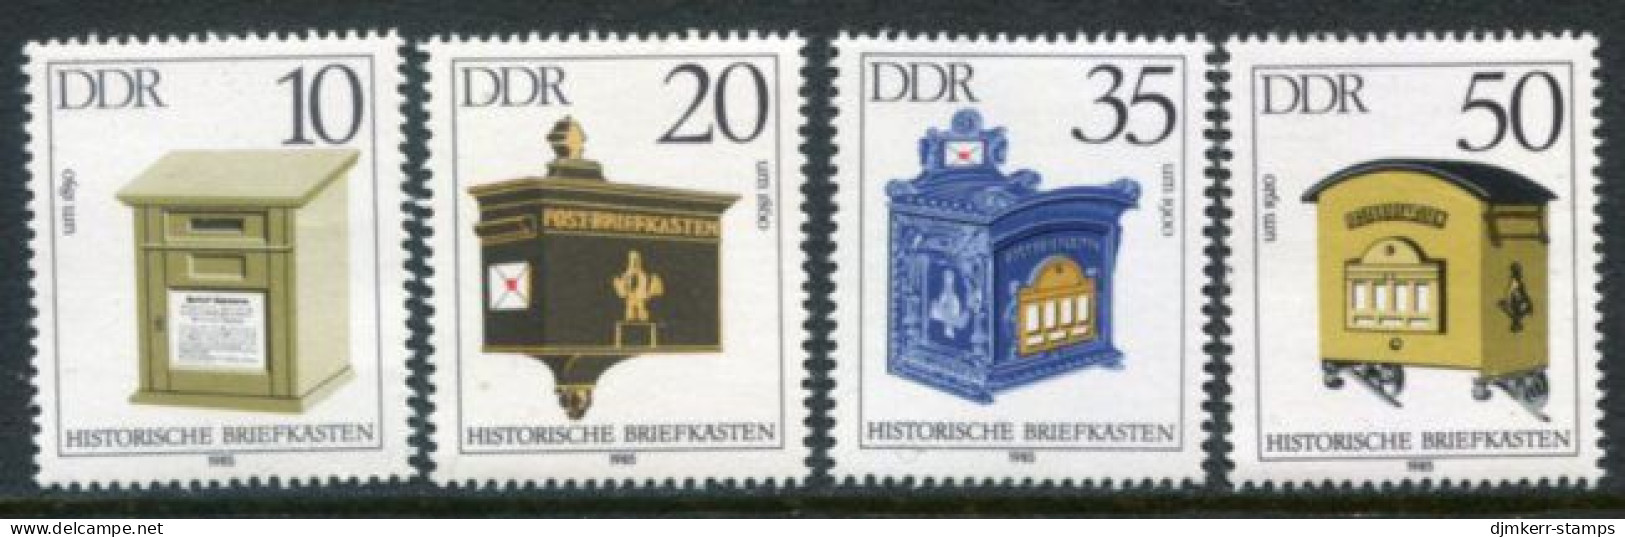 DDR 1985 Histpric Letterboxes MNH / ** .  Michel 2924-27 - Nuevos